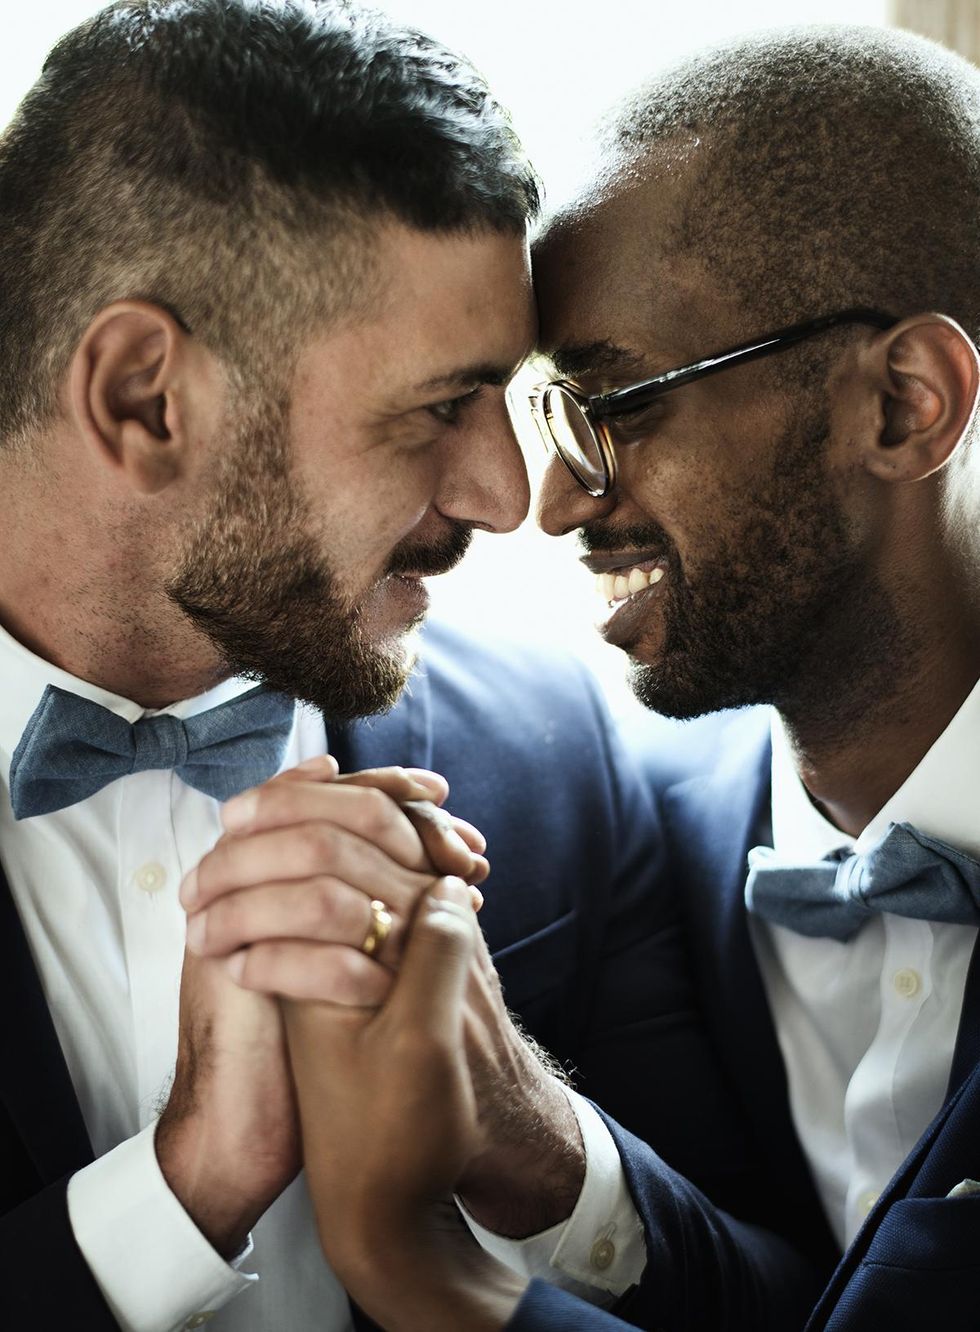 Las Vegas, Nevada, is one of the Top 11 U.S. Cities for LGBTQ+ Weddings